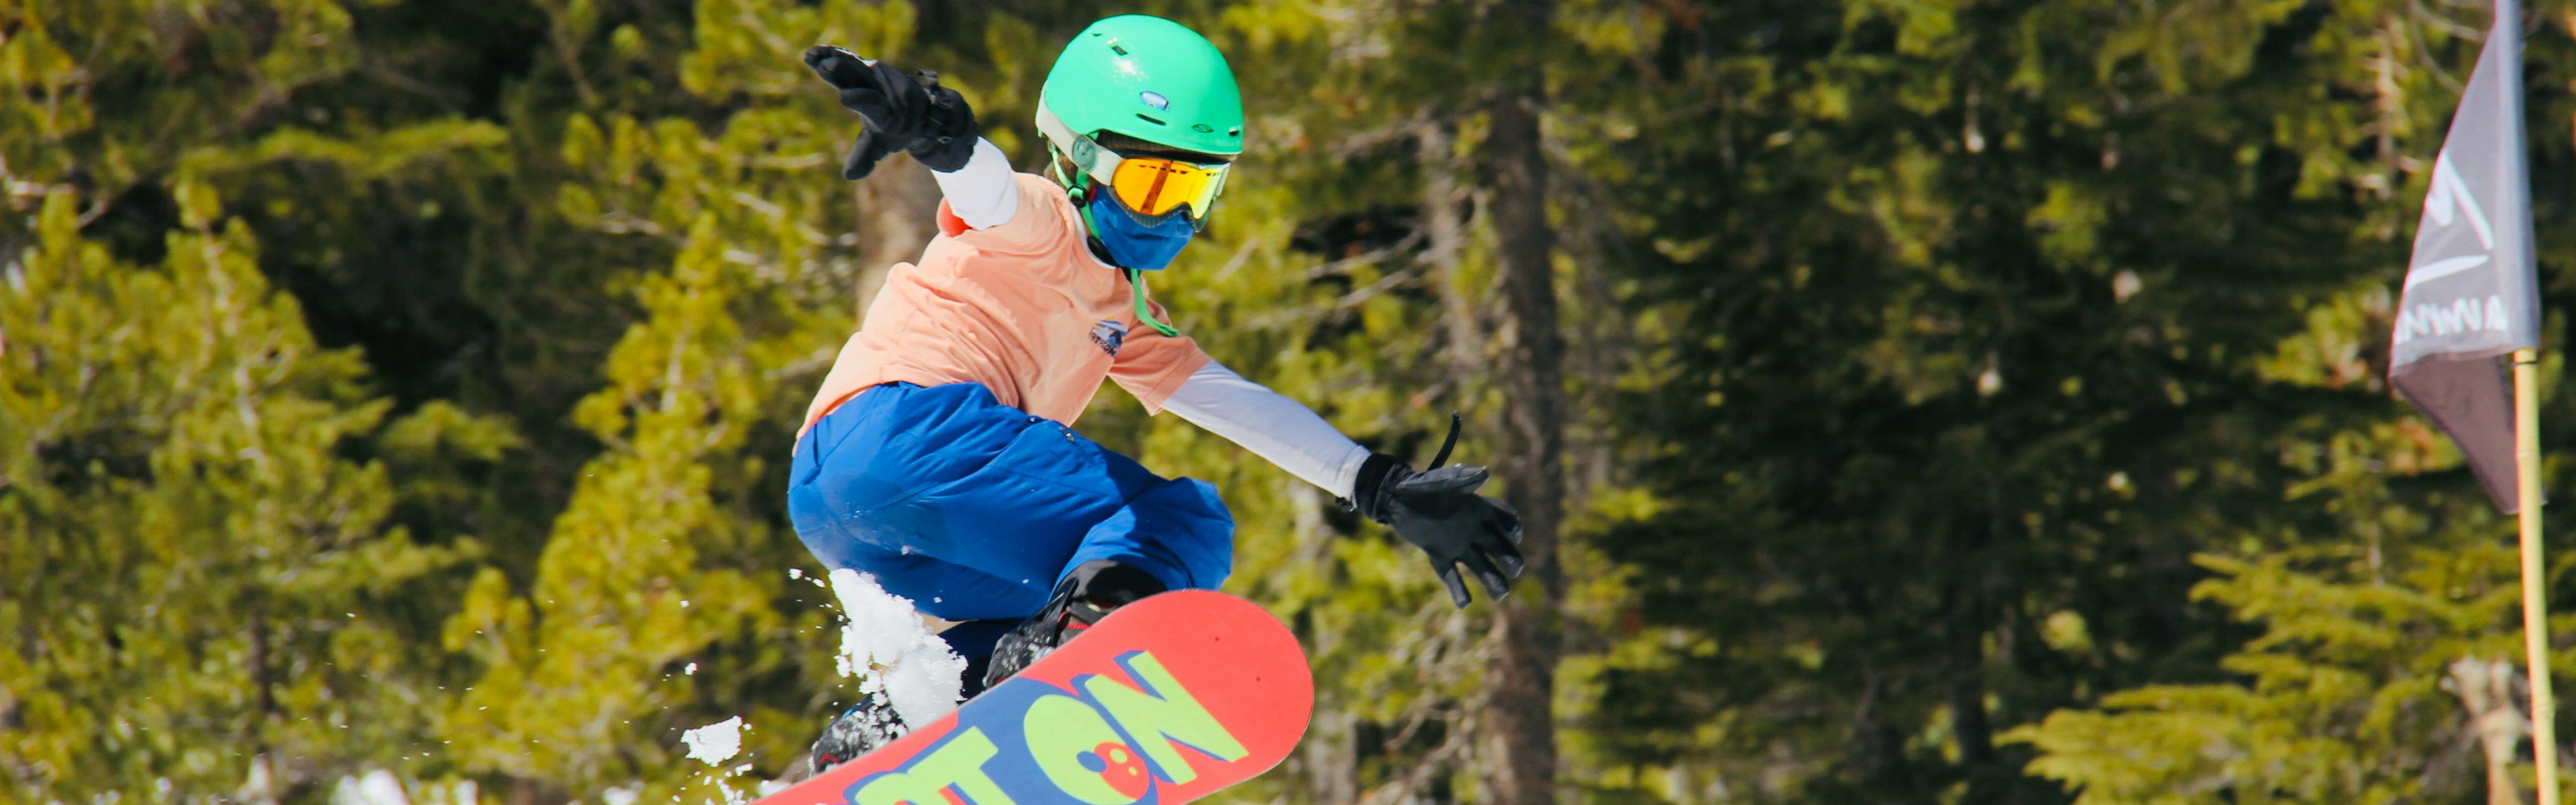 A young girl jumps with her Burton snowboard.